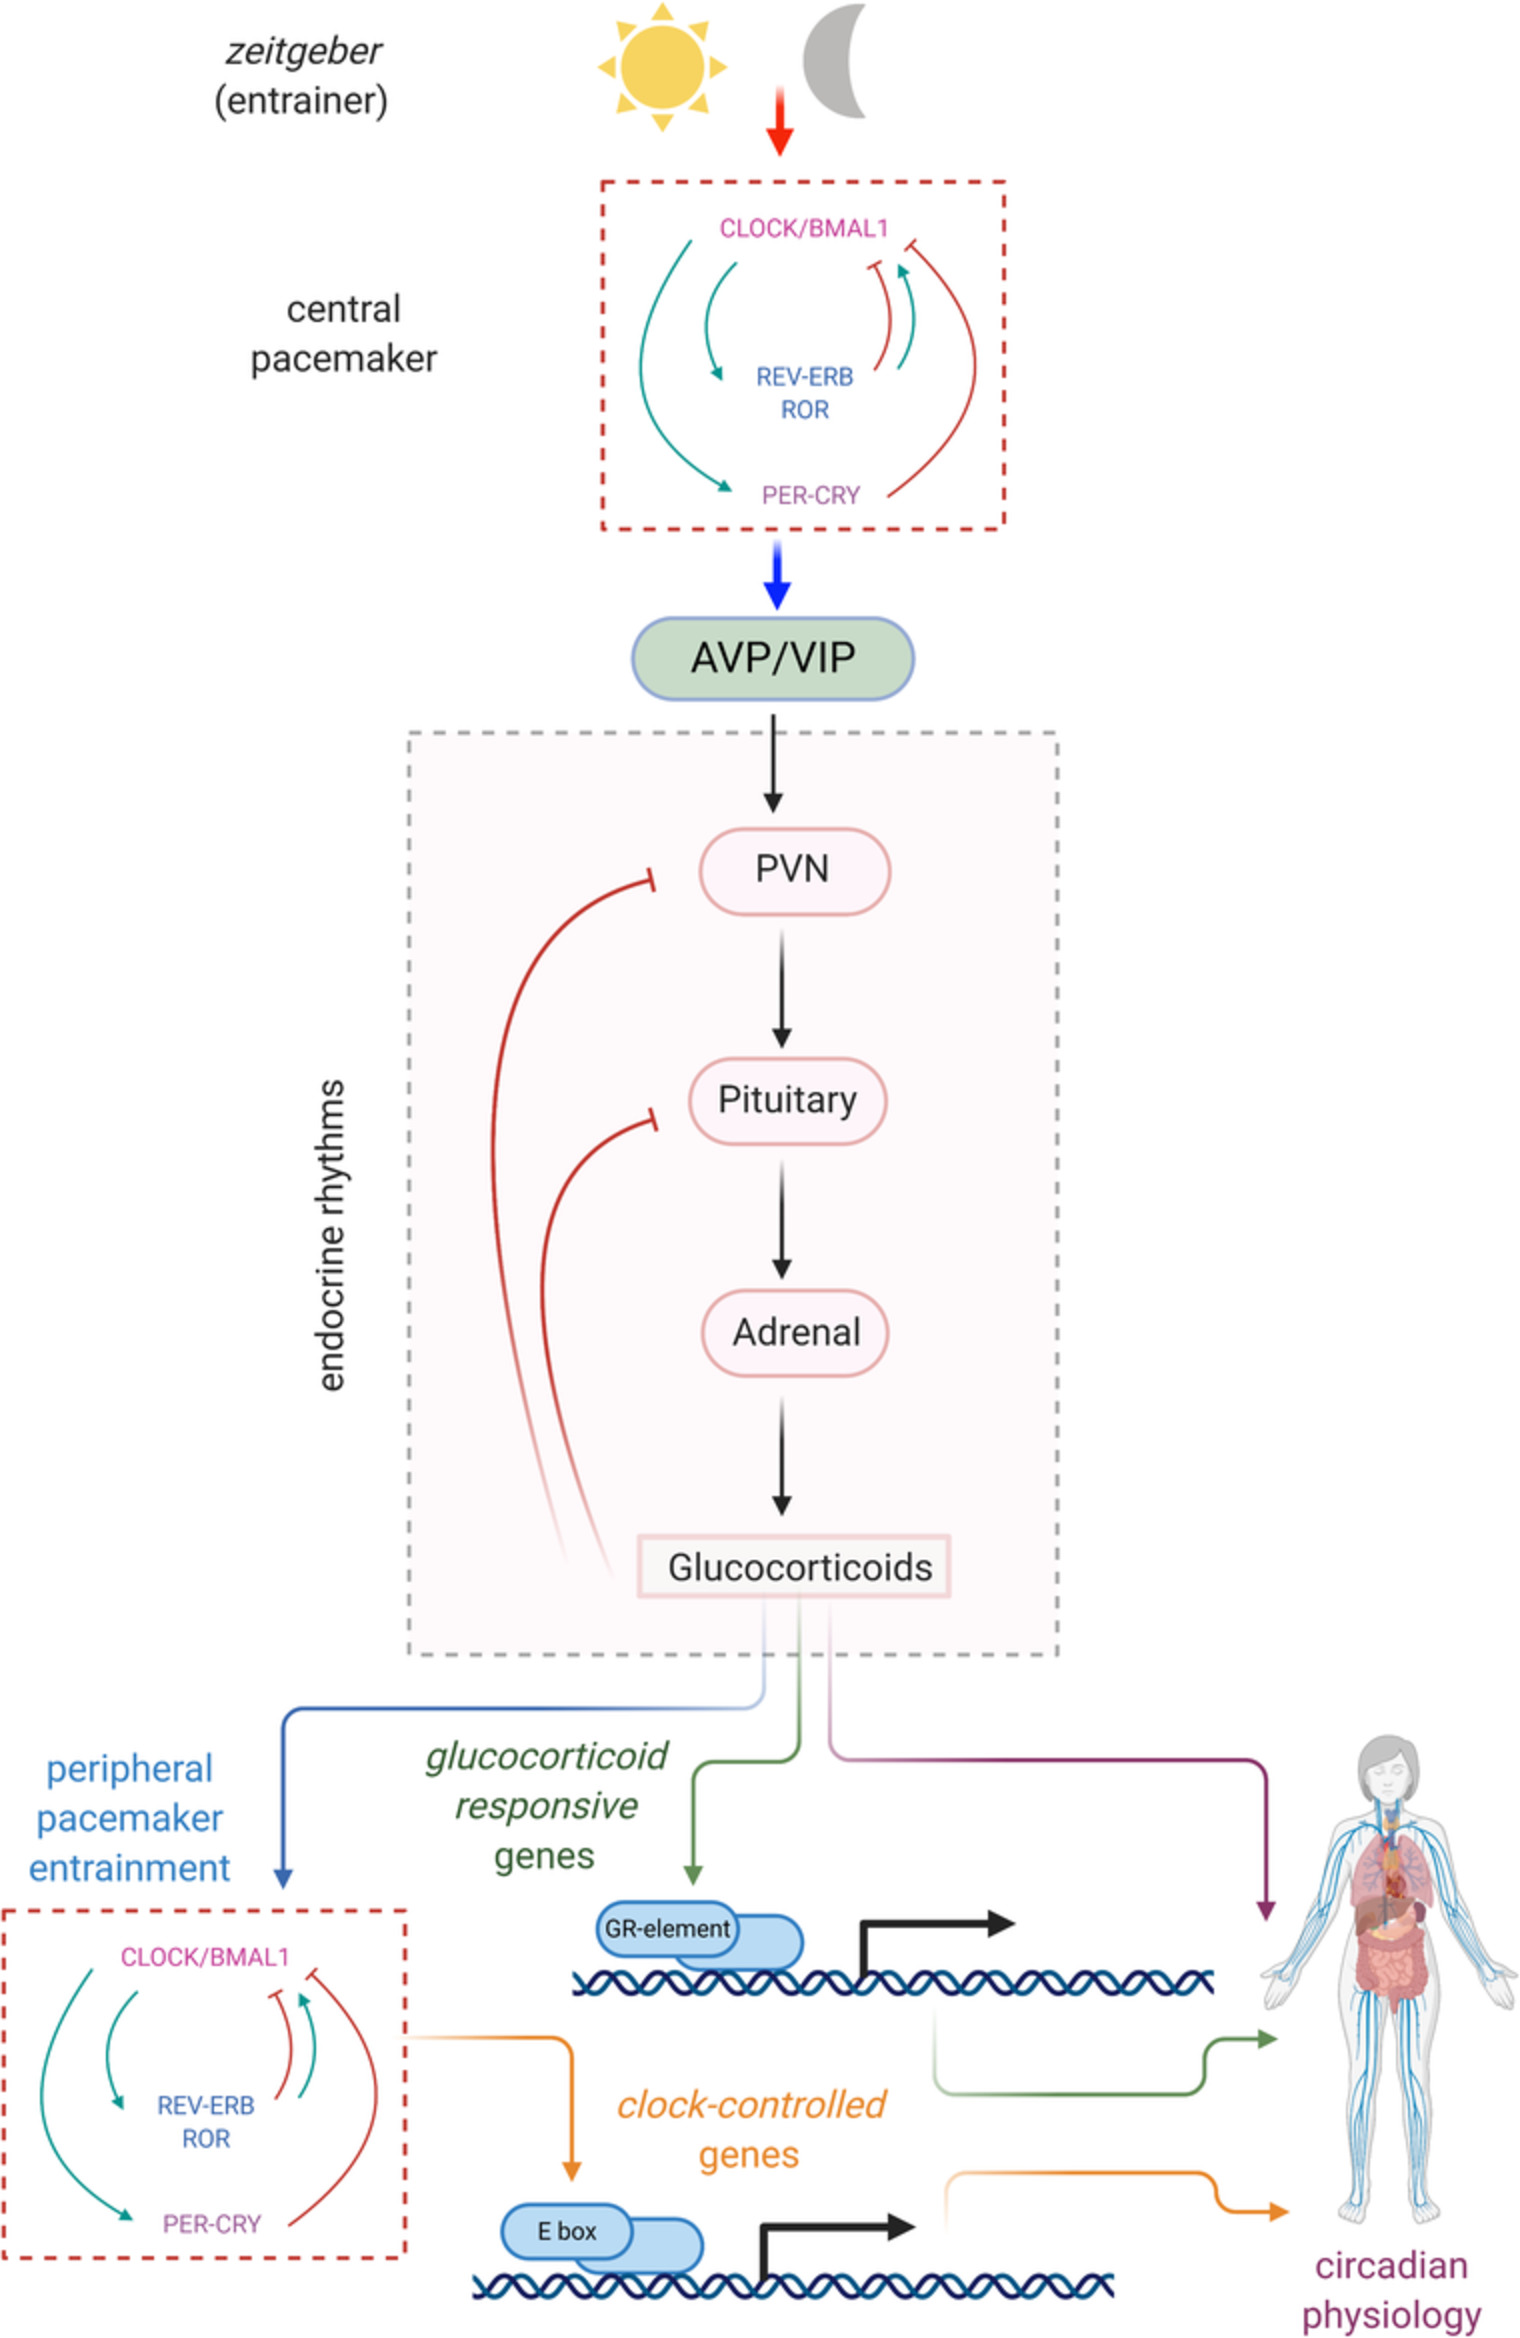 Circadian rhythms and the HPA axis: A systems view